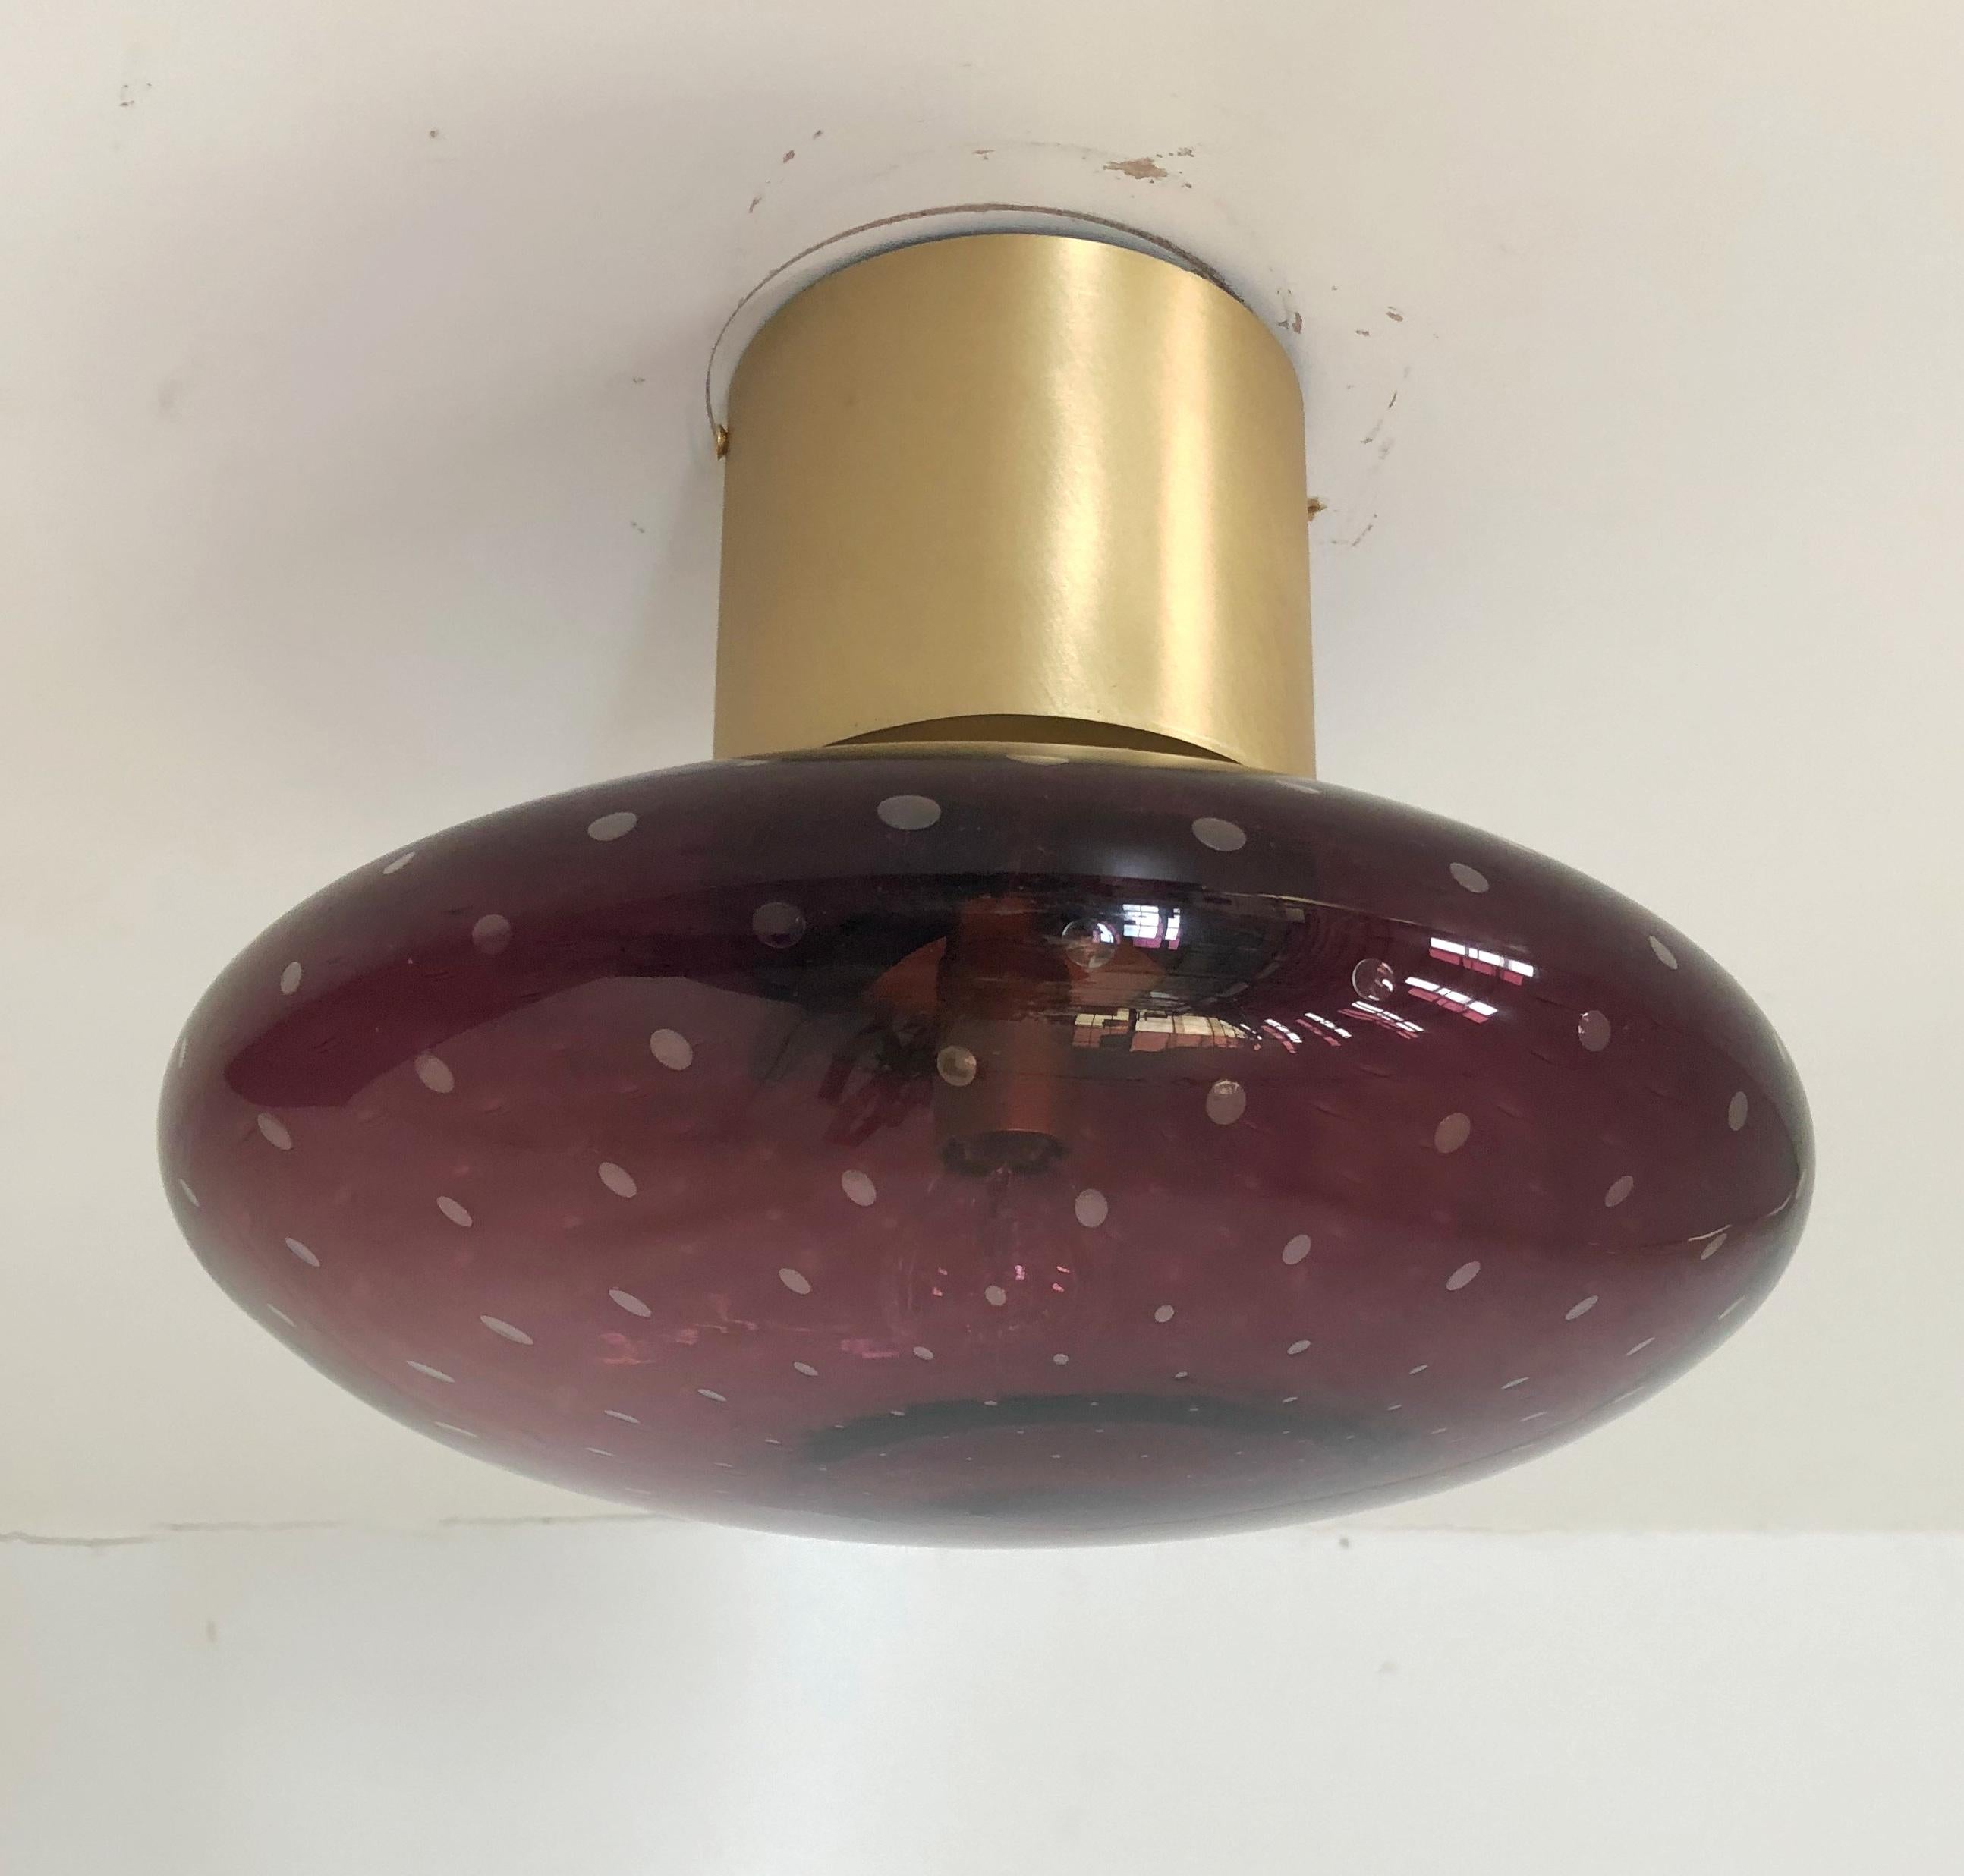 Italian flush mount with Murano glass shade and brass frame / Made in Italy
Designed by Fabio Ltd, inspired by Angelo Lelli and Arredoluce styles
1 light / E12 or E14 type / max 40W each
Diameter: 12 inches / Height: 9.5 inches
Order only / This